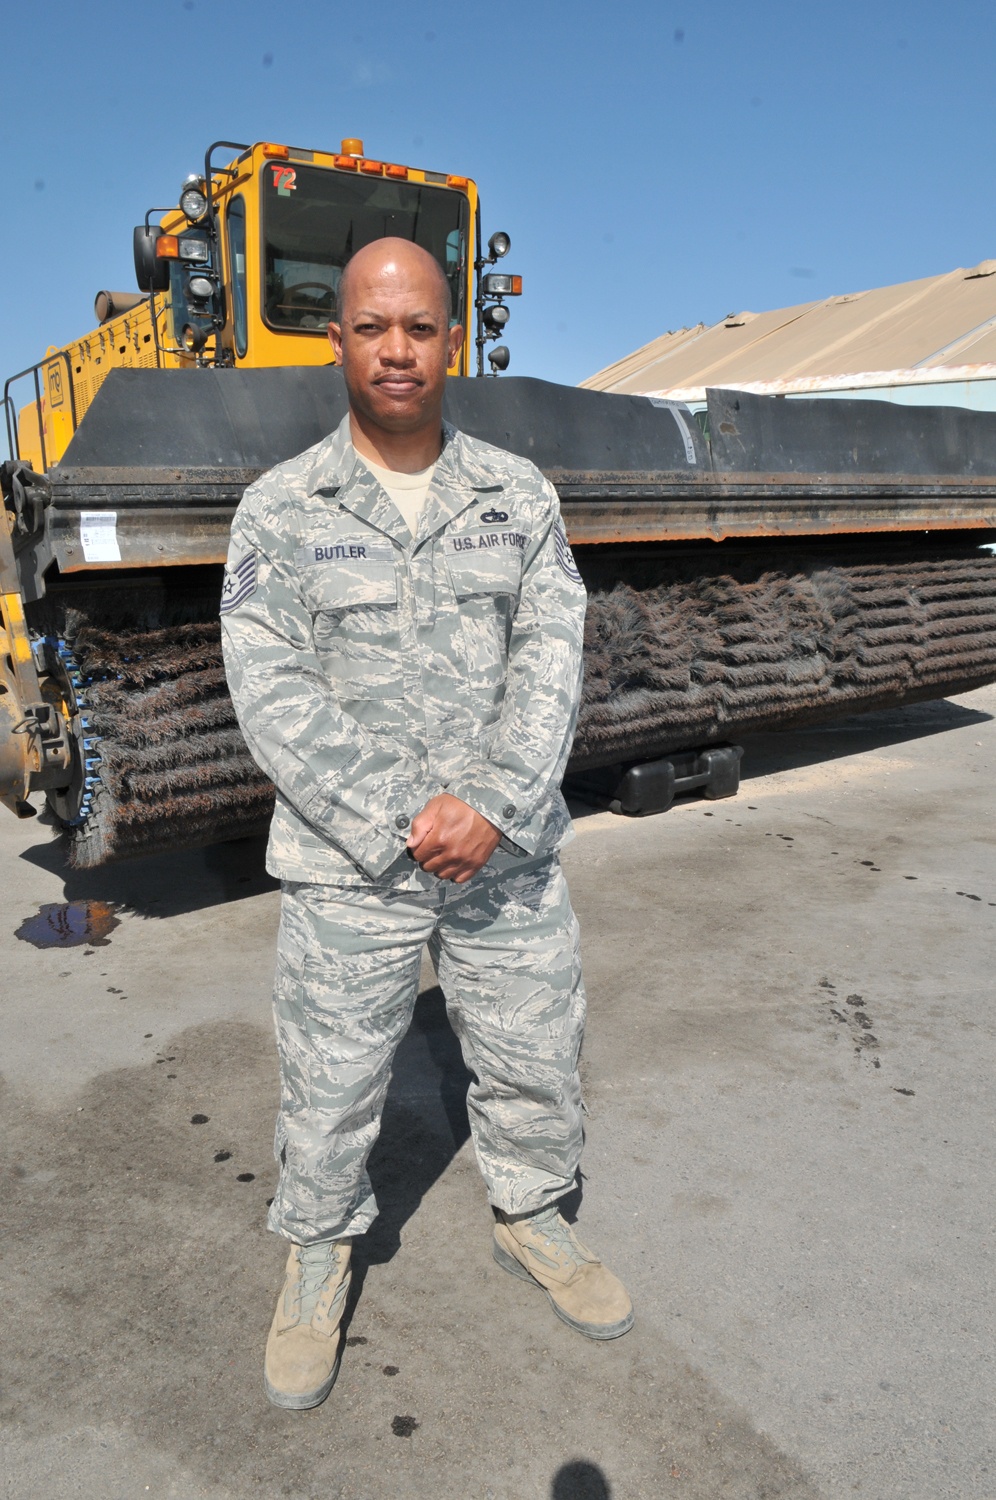 Mobility Airman profile: Joint Base Lewis-McChord NCO supports vehicle maintenance ops in Kyrgyzstan